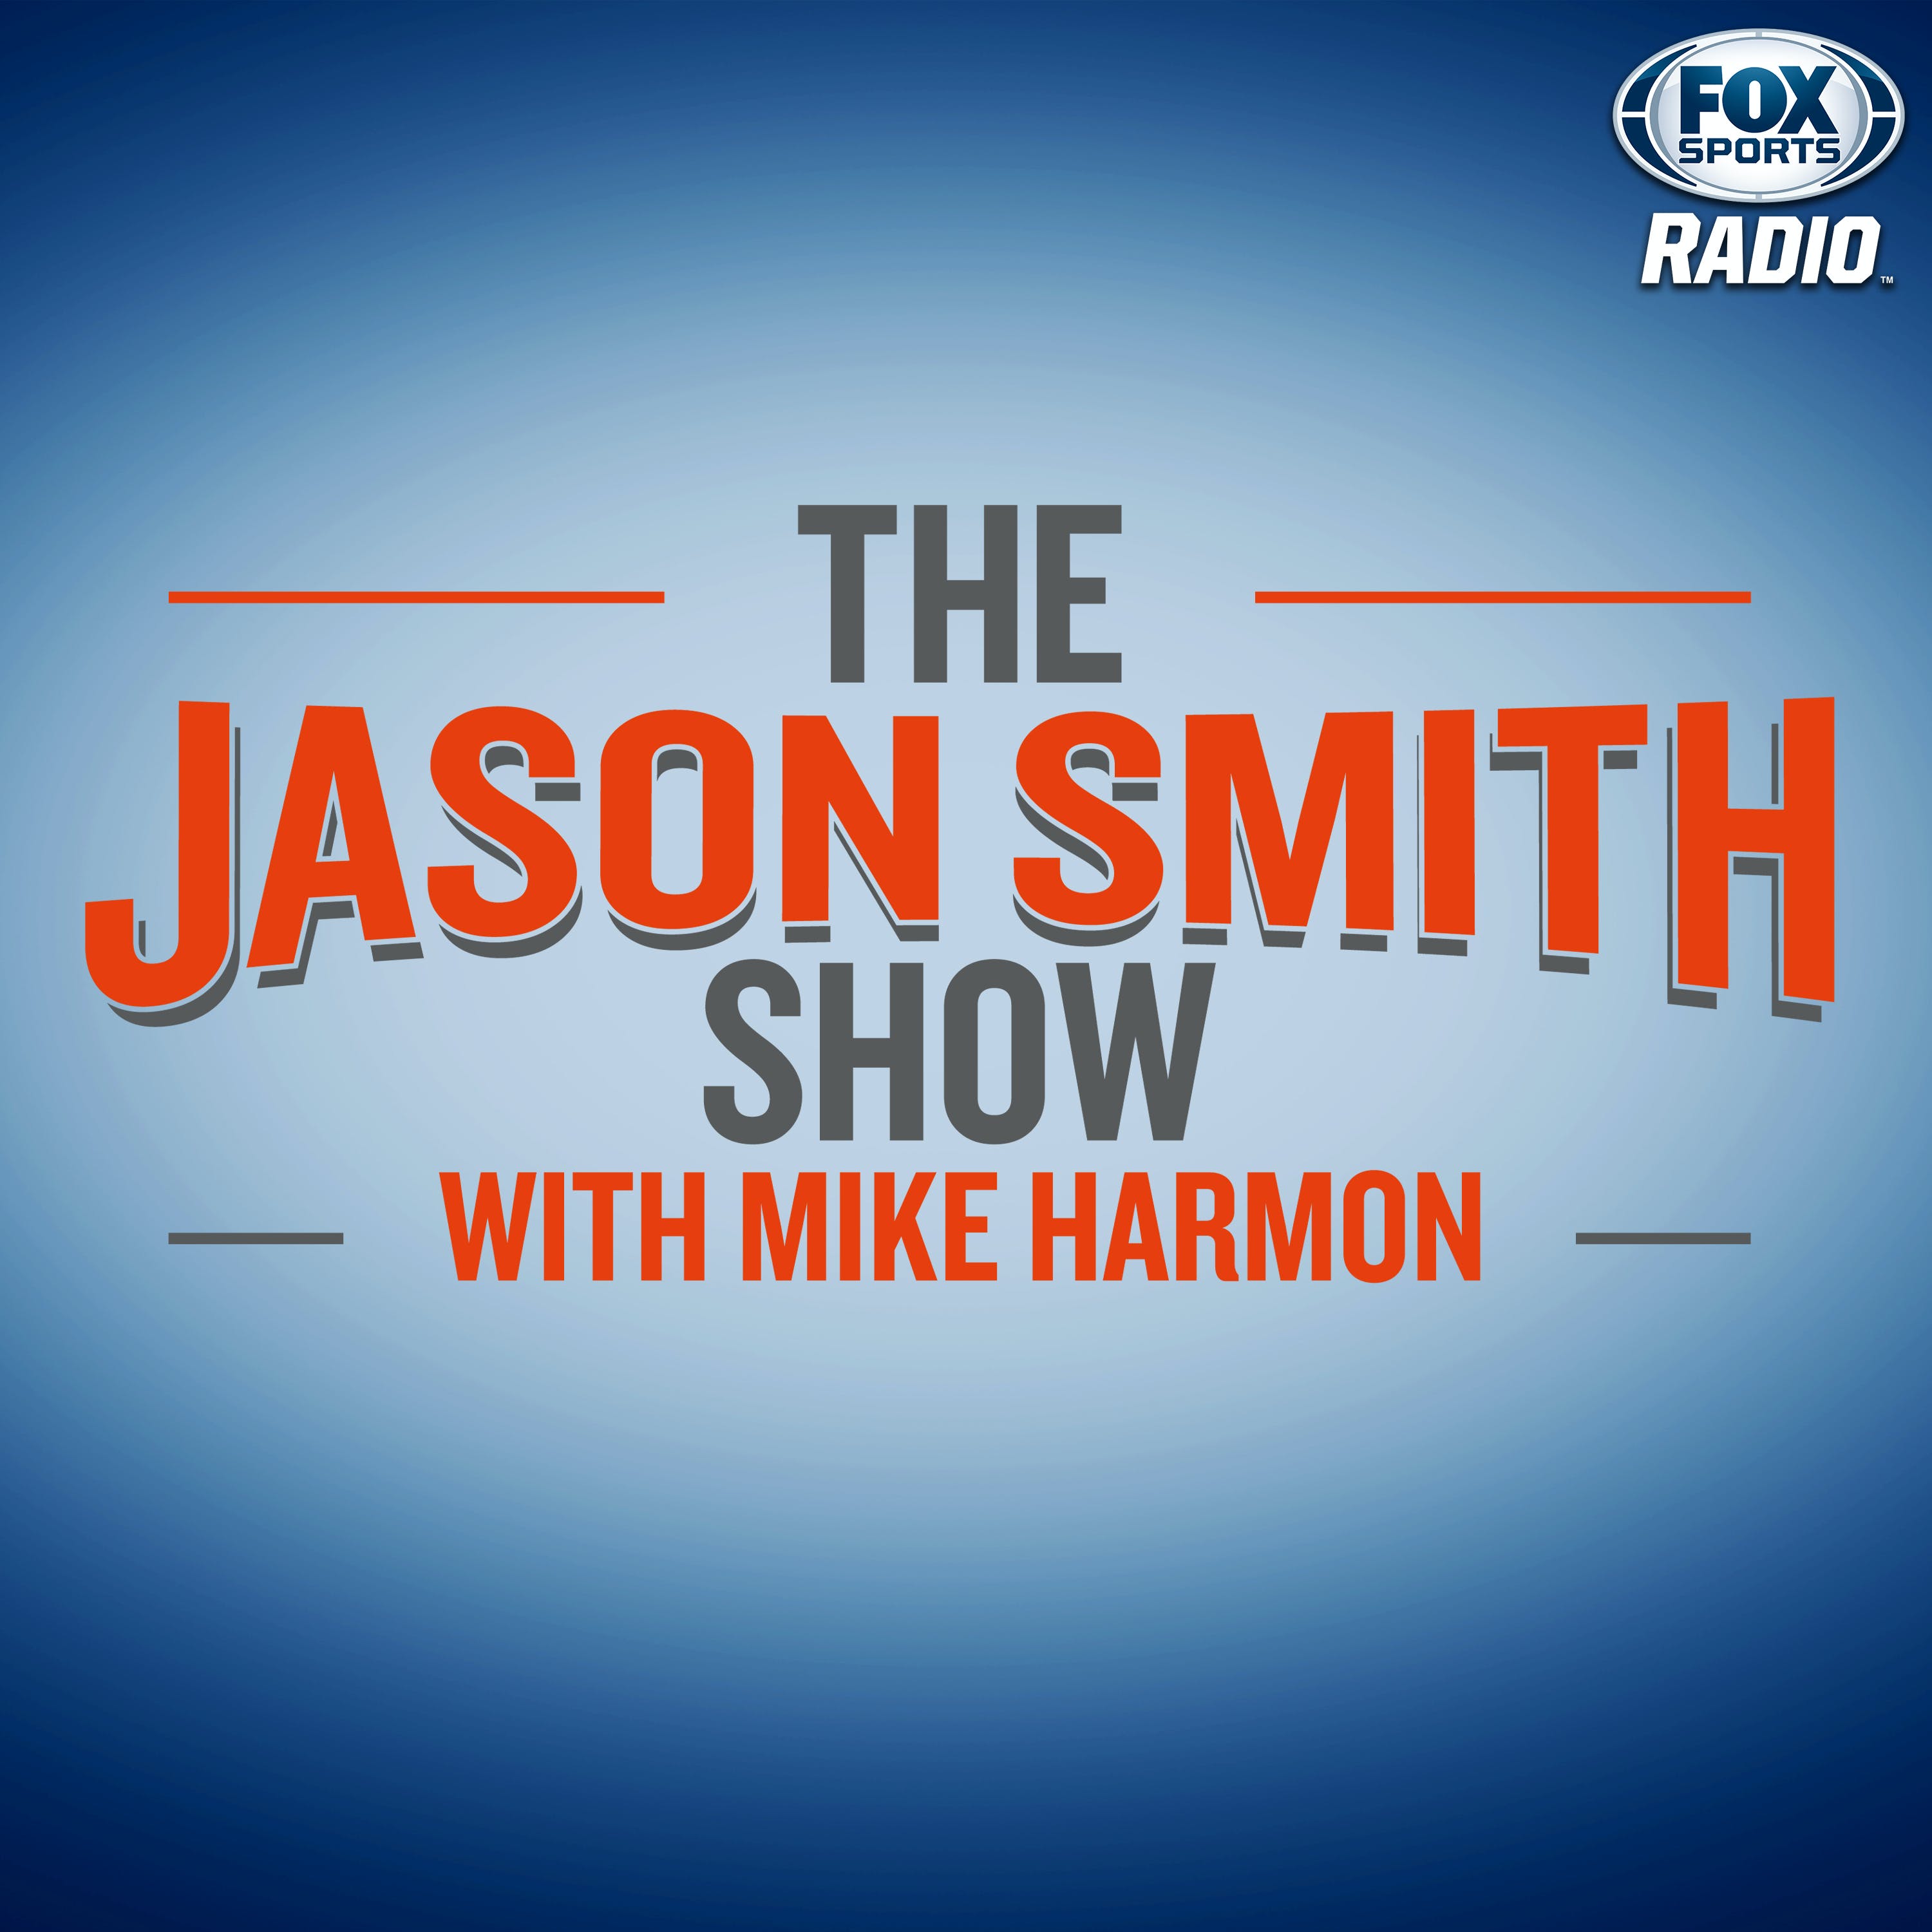 07/28/2021 - Best of The Jason Smith Show with Mike Harmon